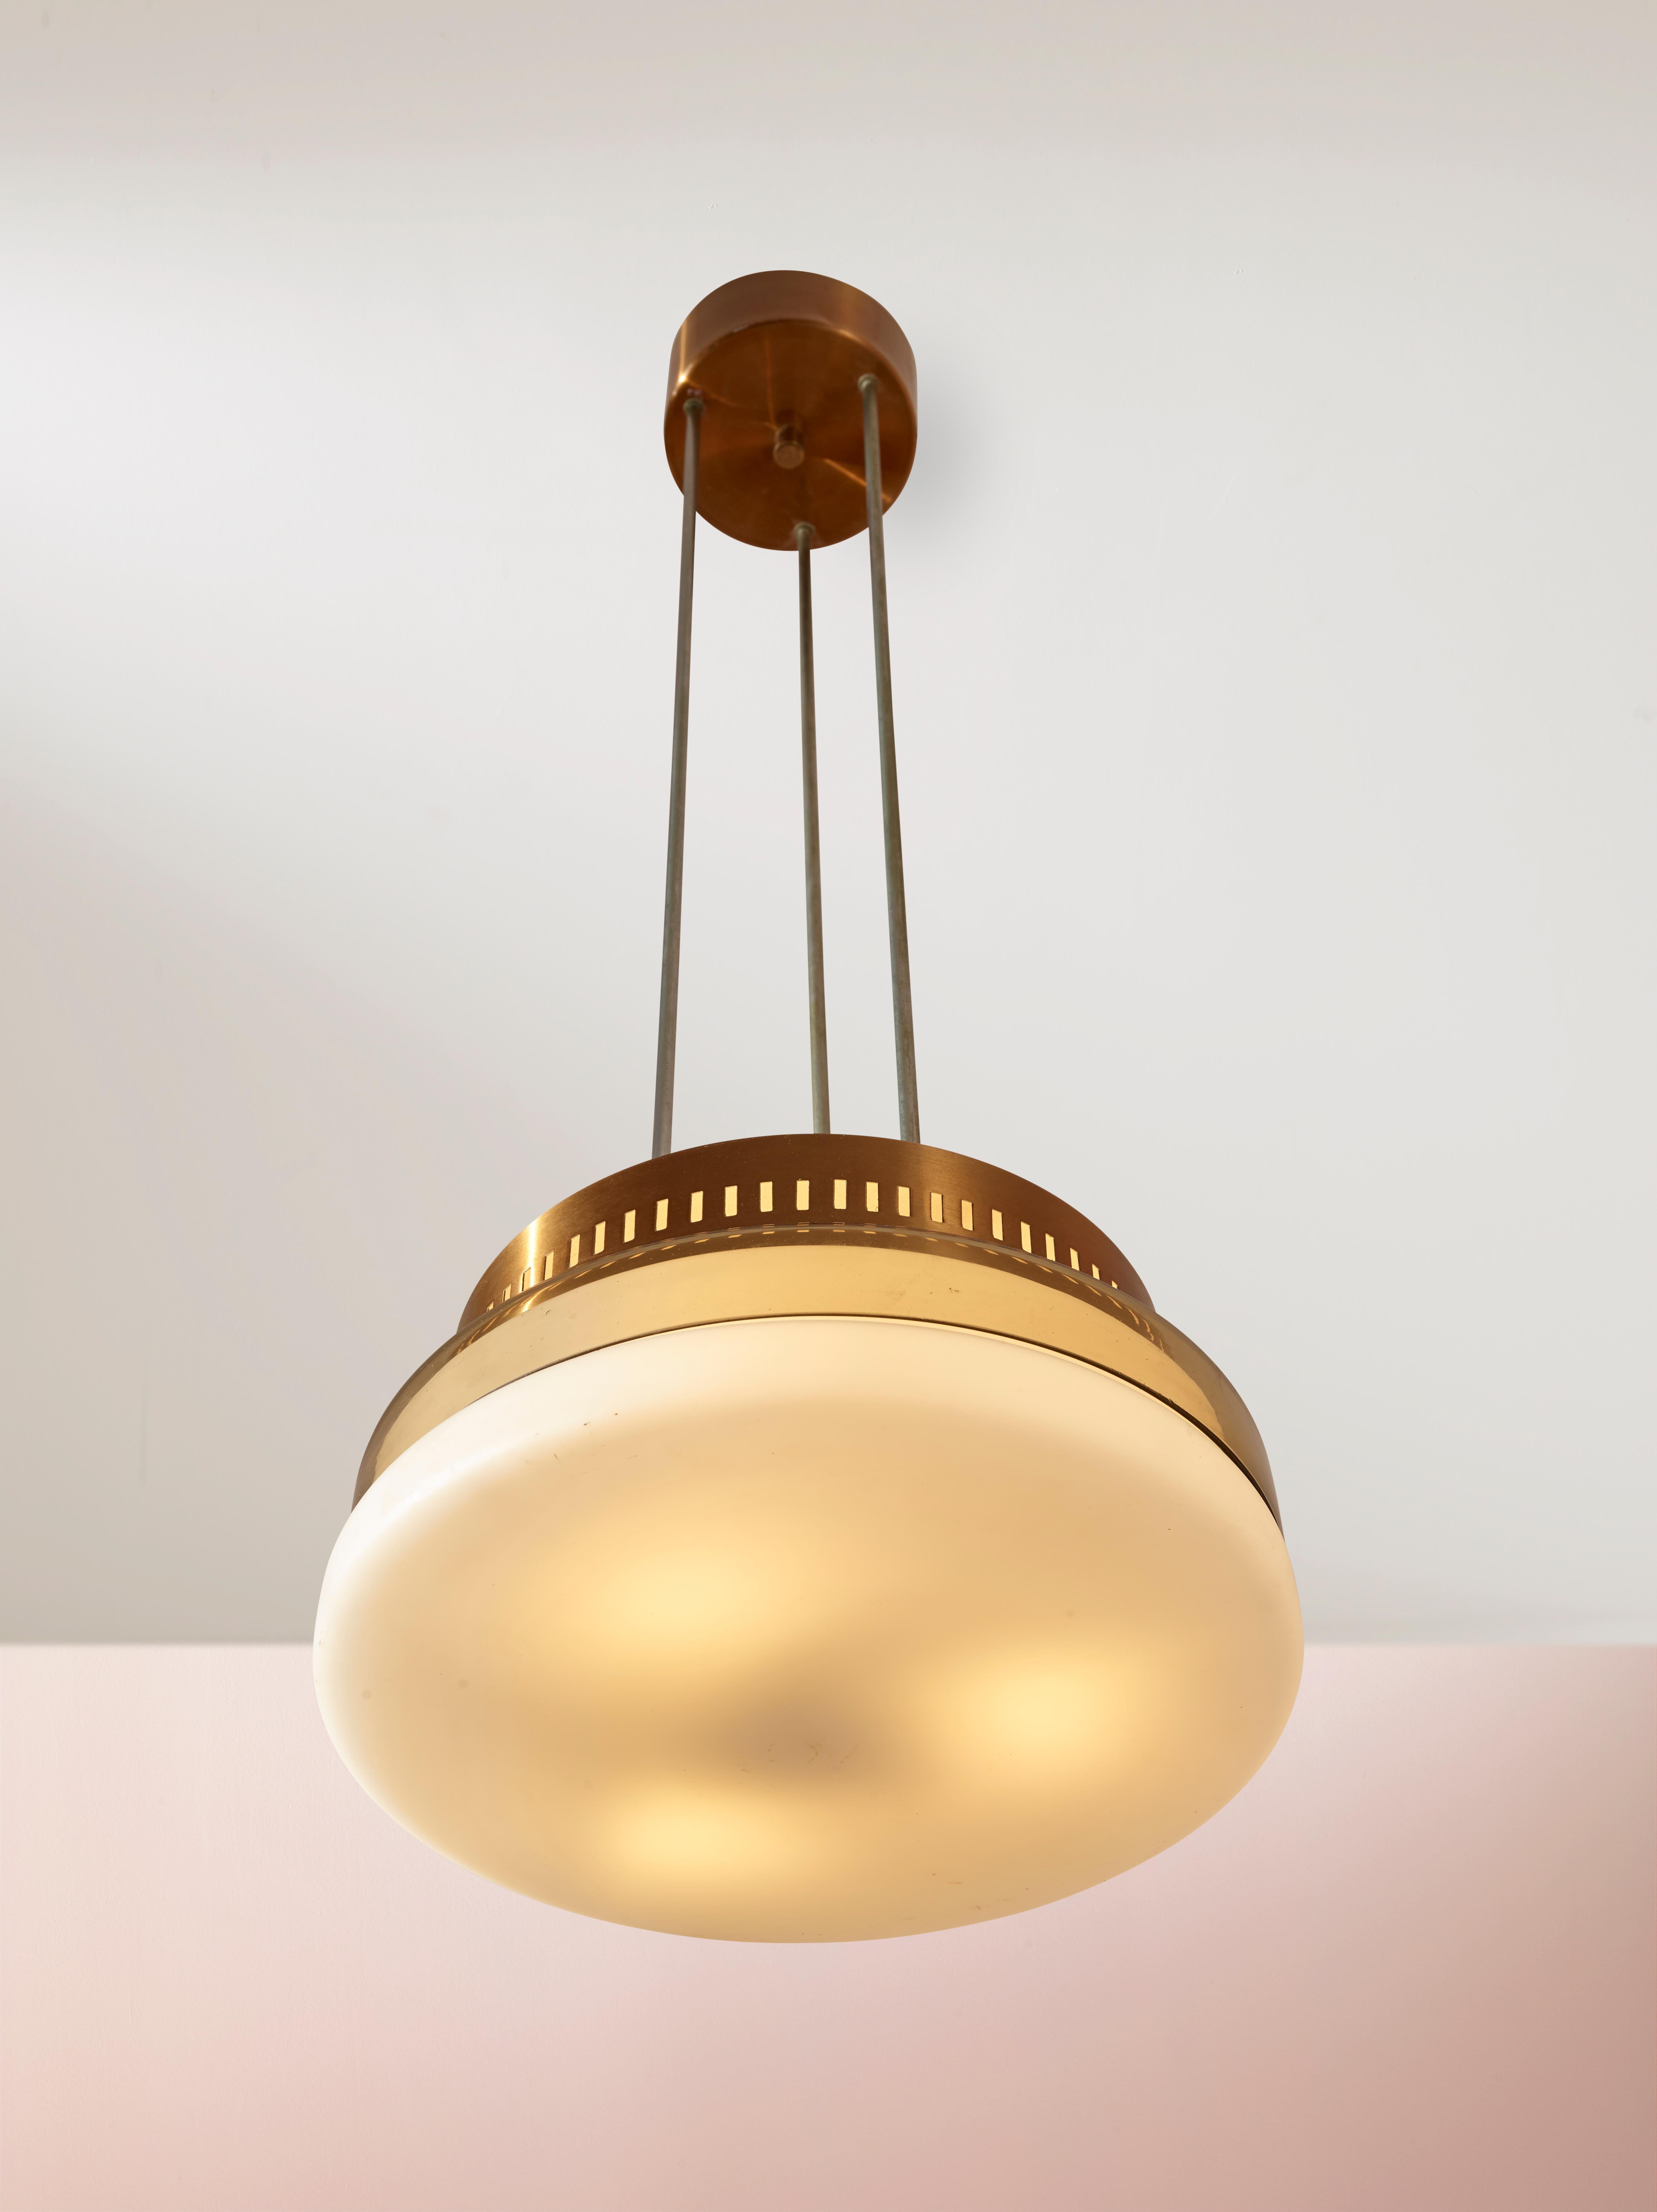 Metal Midcentury Stilnovo Style Pendant Light Made of Glass and Copper, Italy, 1960s For Sale